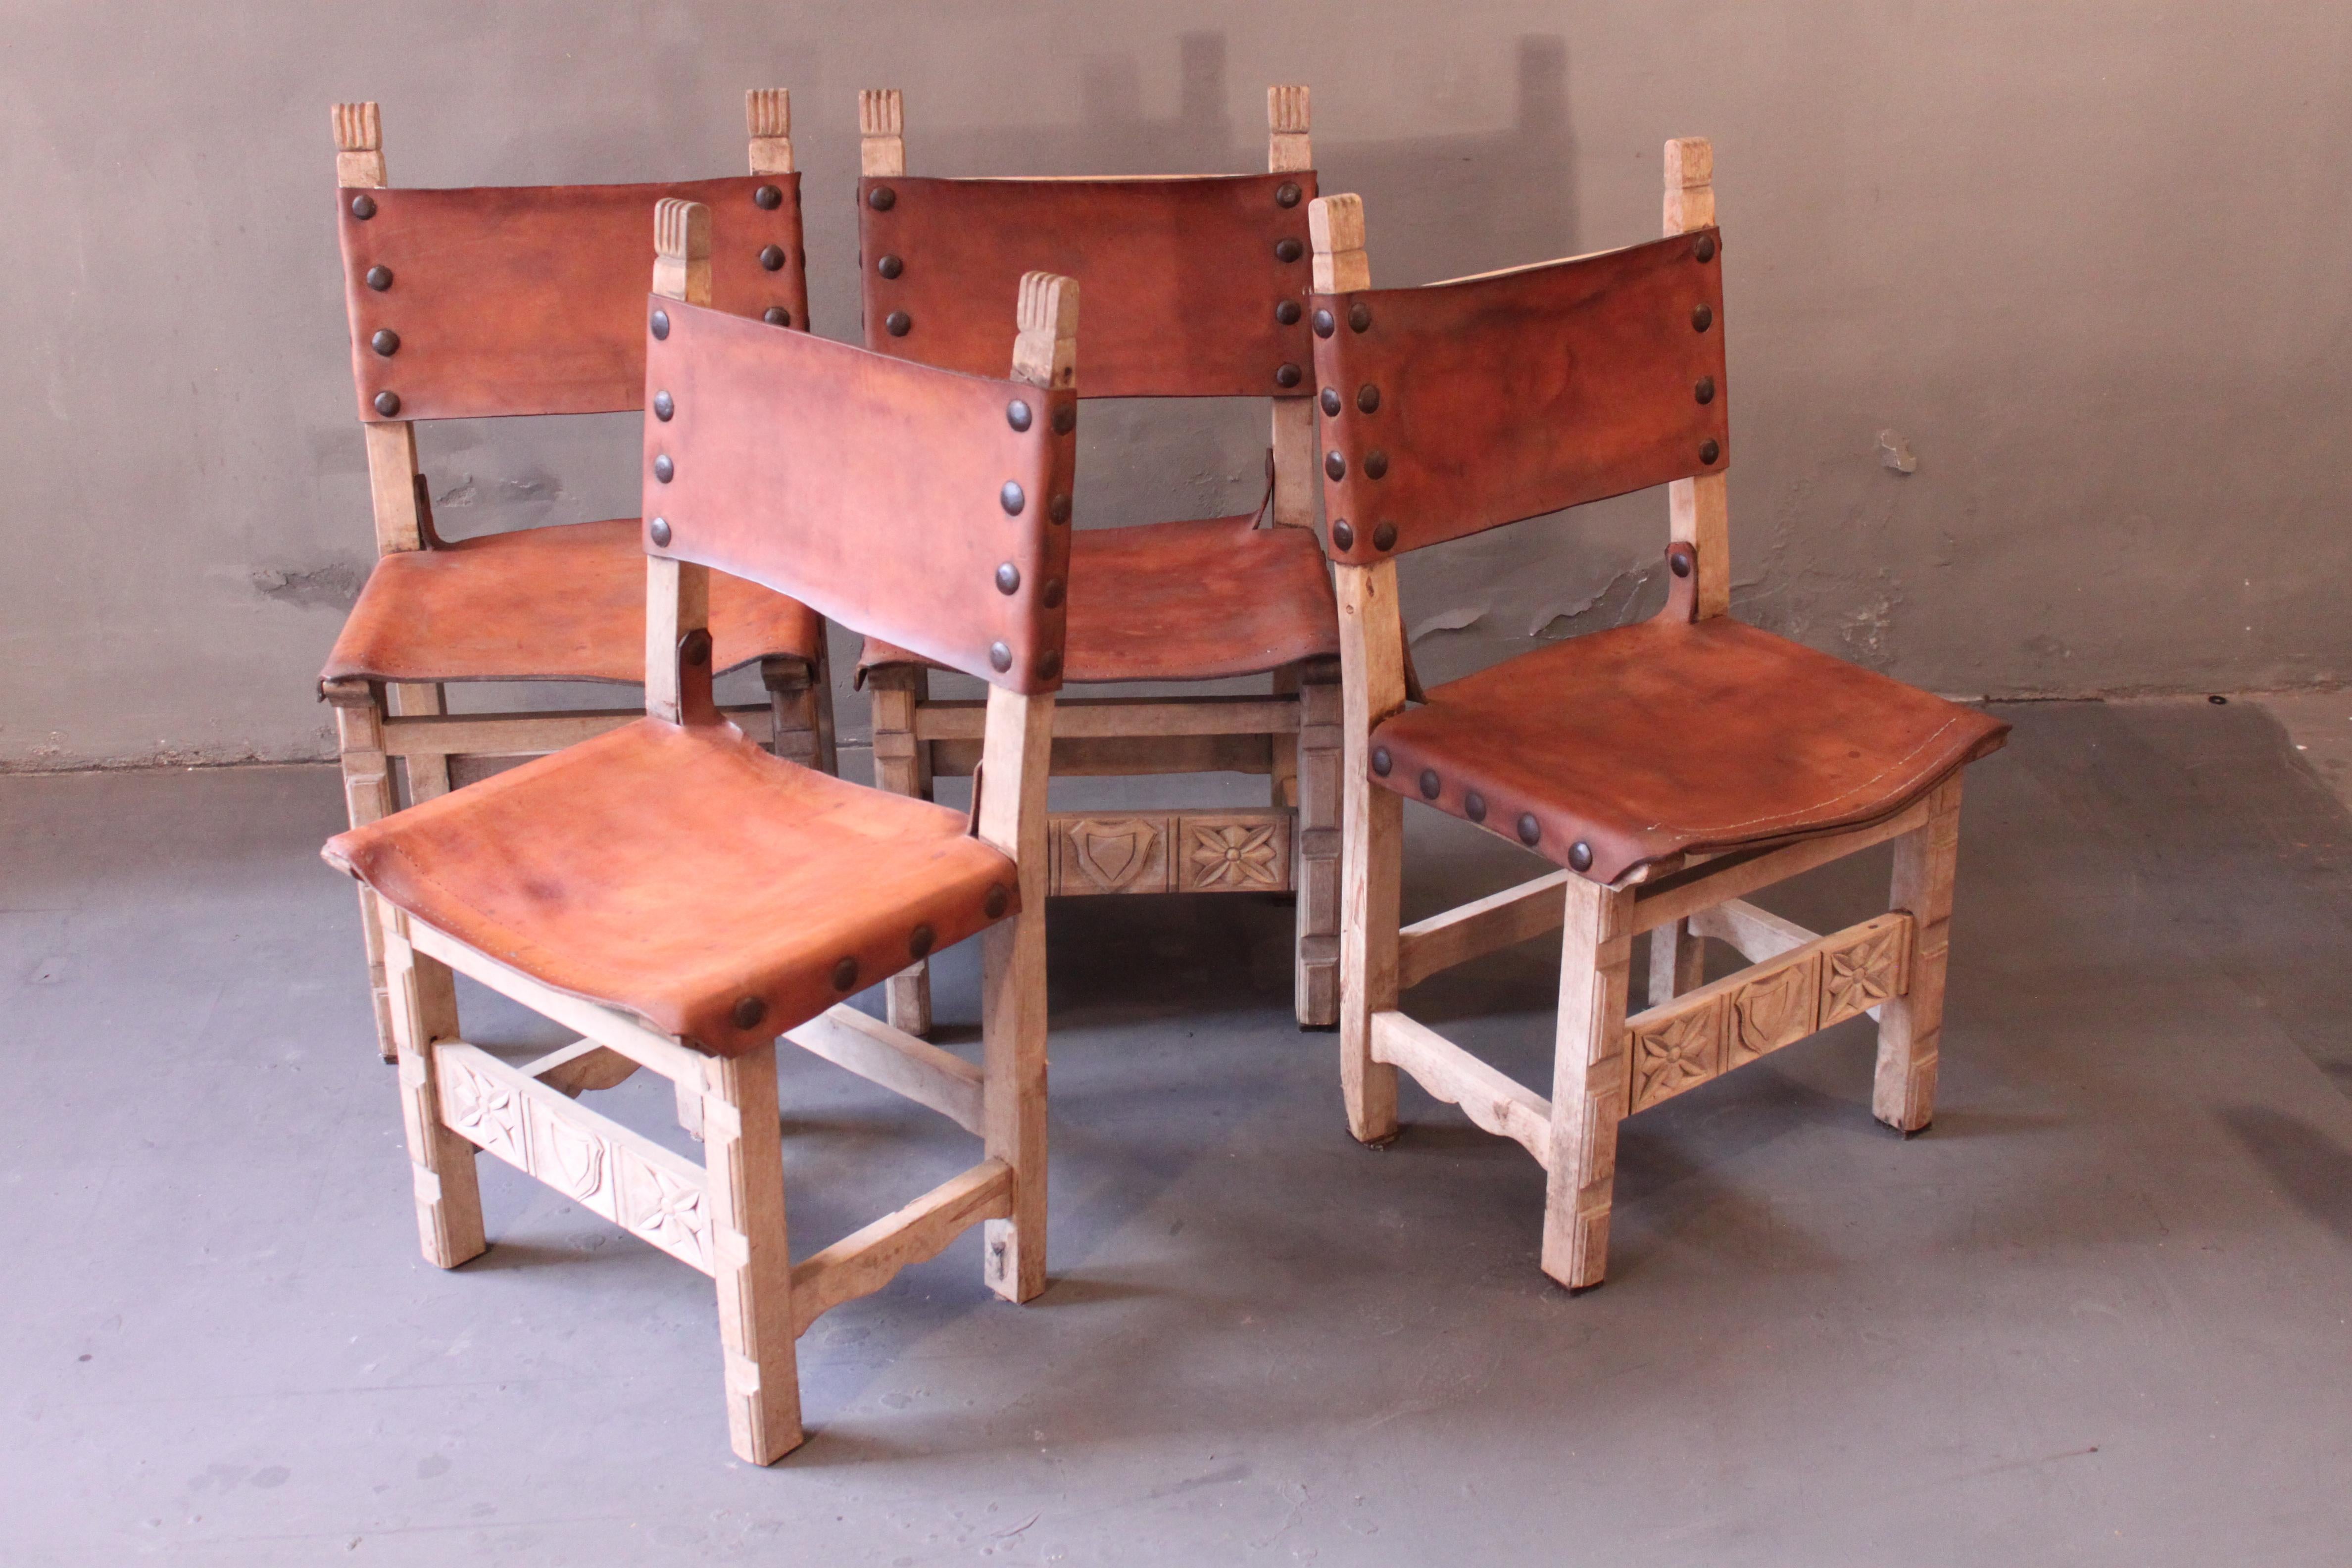 Typical Spanish chairs from circa 1930, Handcrafted, Designer unknown. Leather seat and backrest. Simple ornaments of beauty.